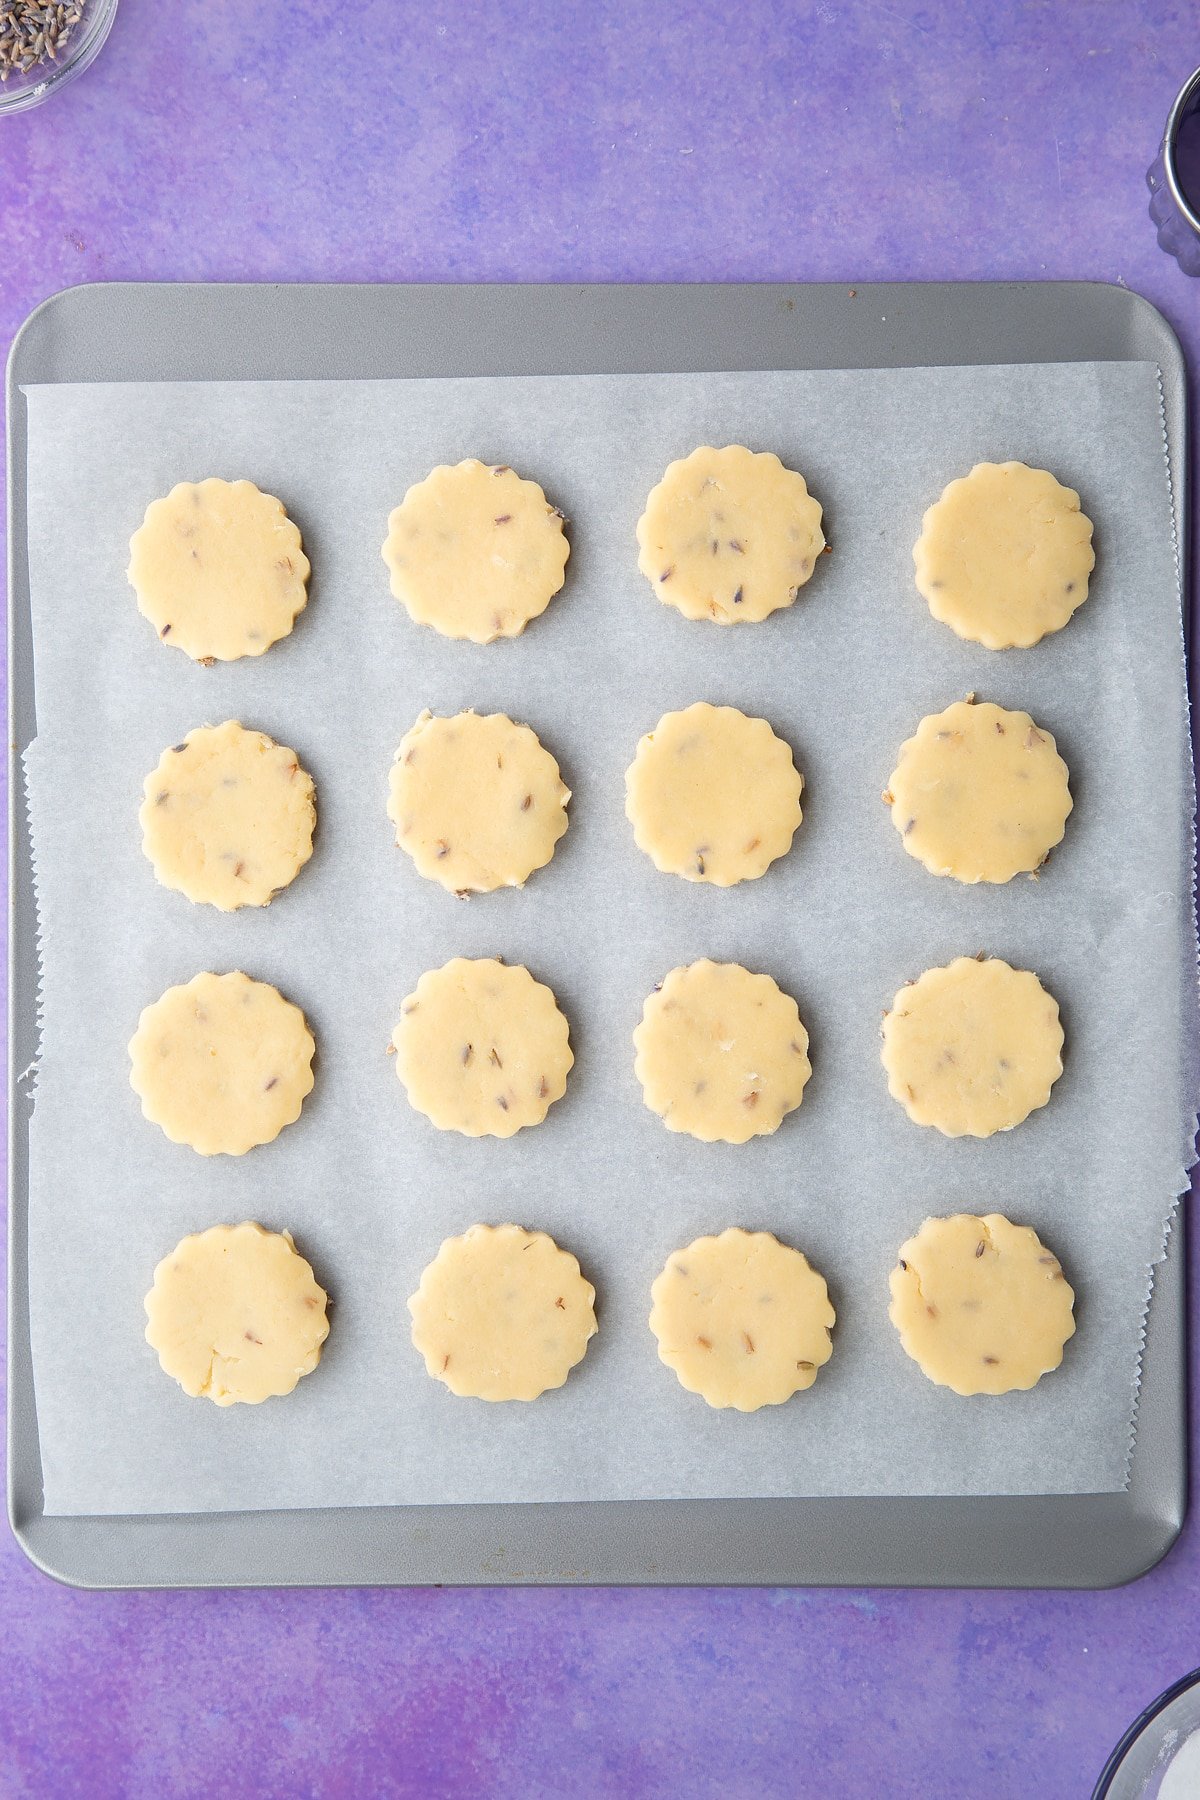 Lavender shortbread cookies on a tray ready to bake.